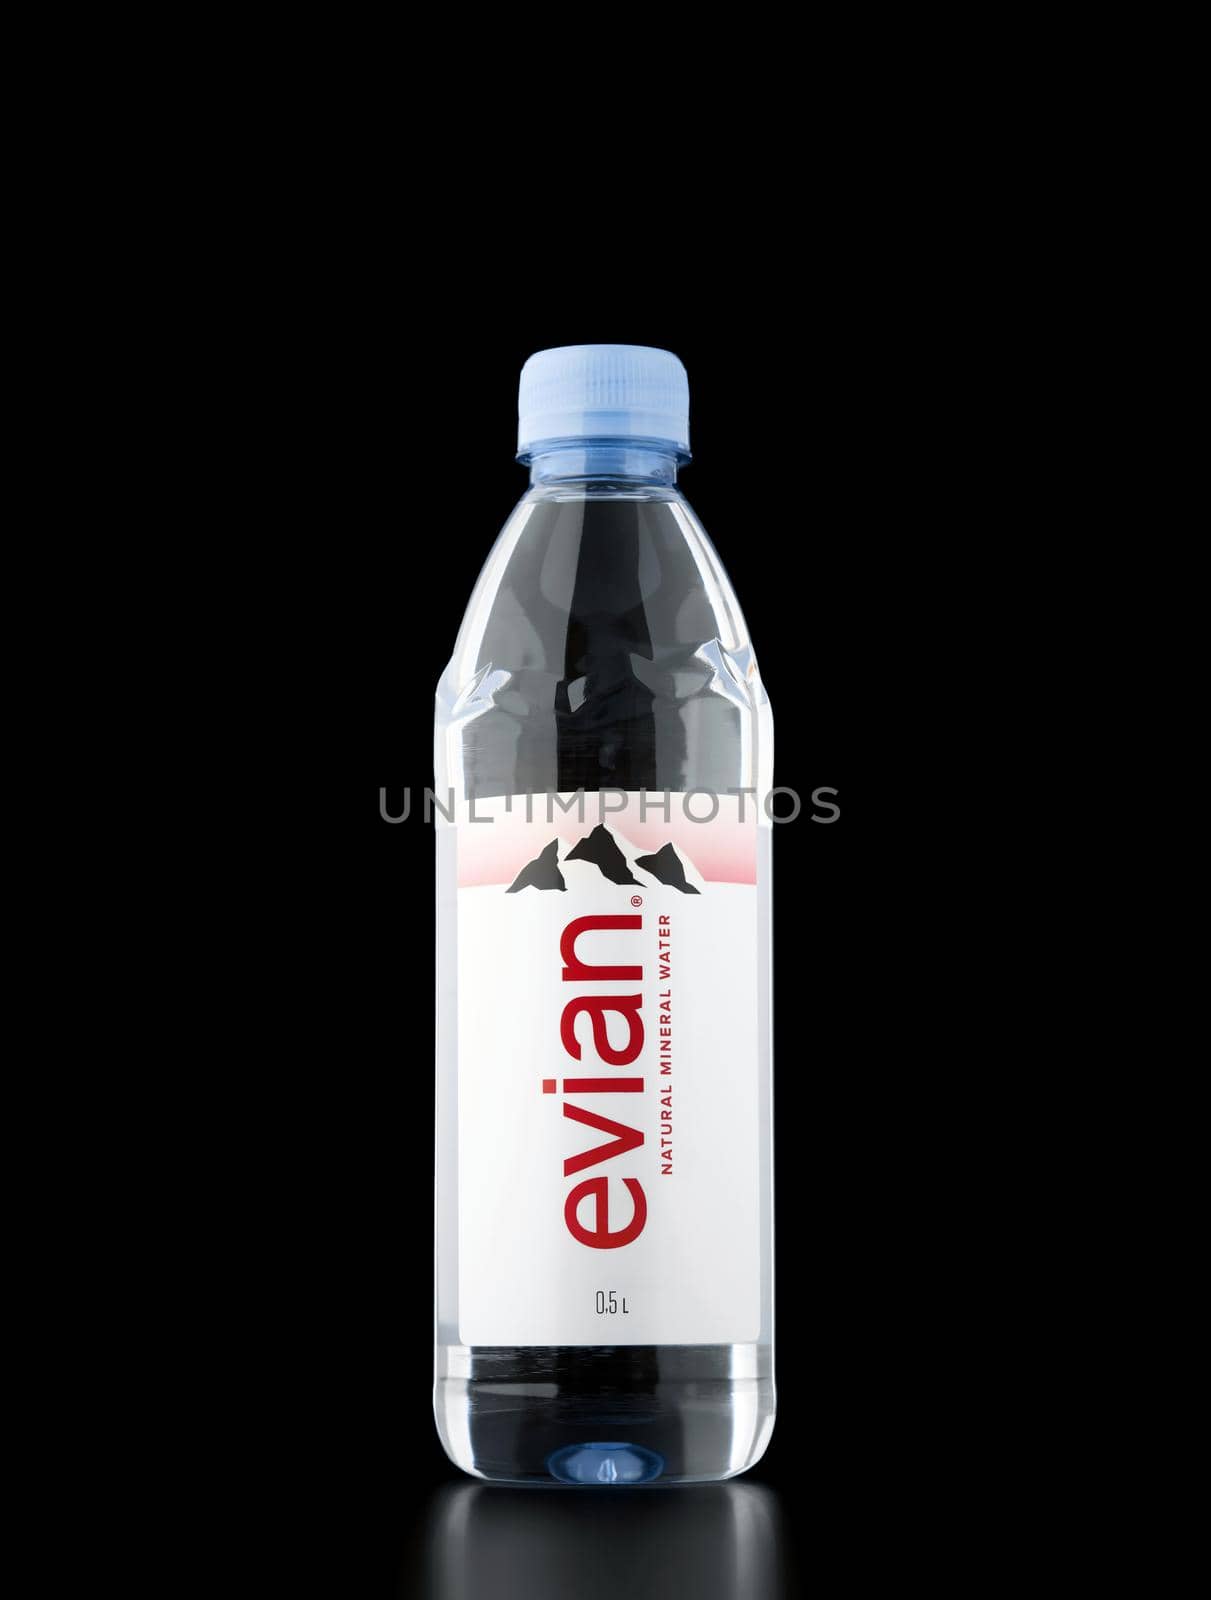 Evian Natural Mineral Water on the black background. Evian is a brand of mineral water coming from several sources near Evian les Bains. 26.12.2021, Rostov region, Russia.